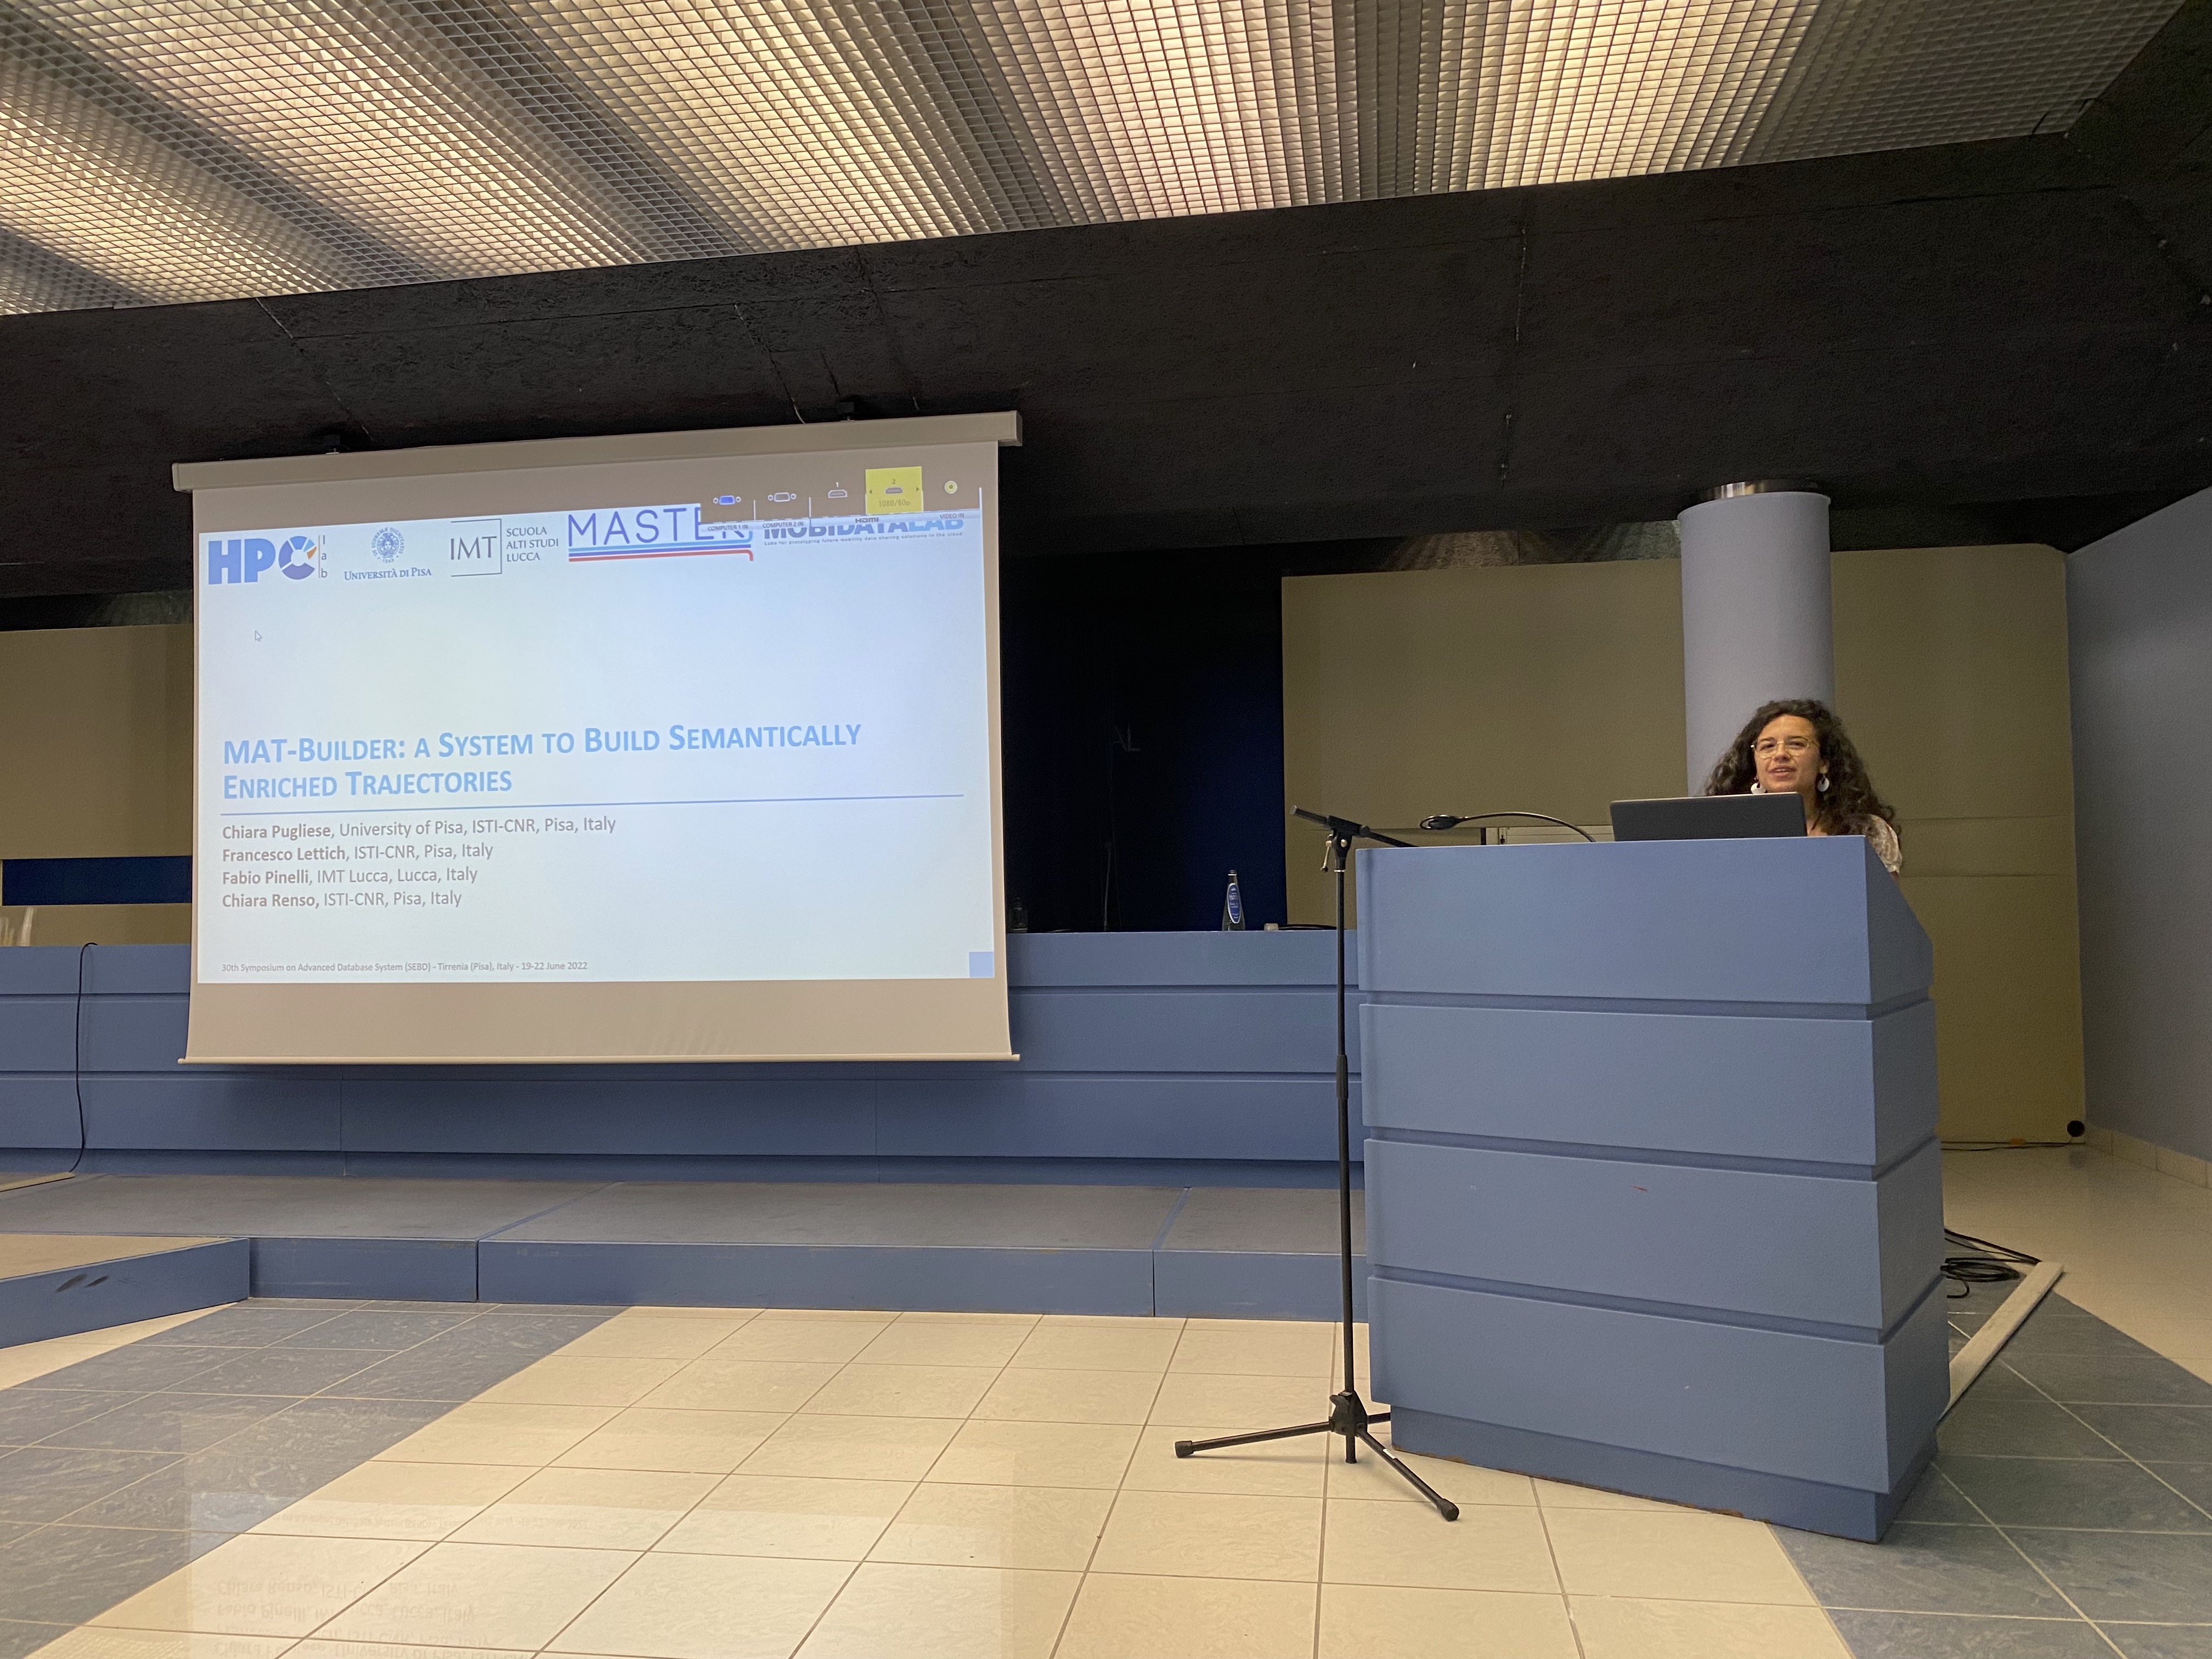 MAT-Builder tool presented at the Italian Database Conference SEBD 2022